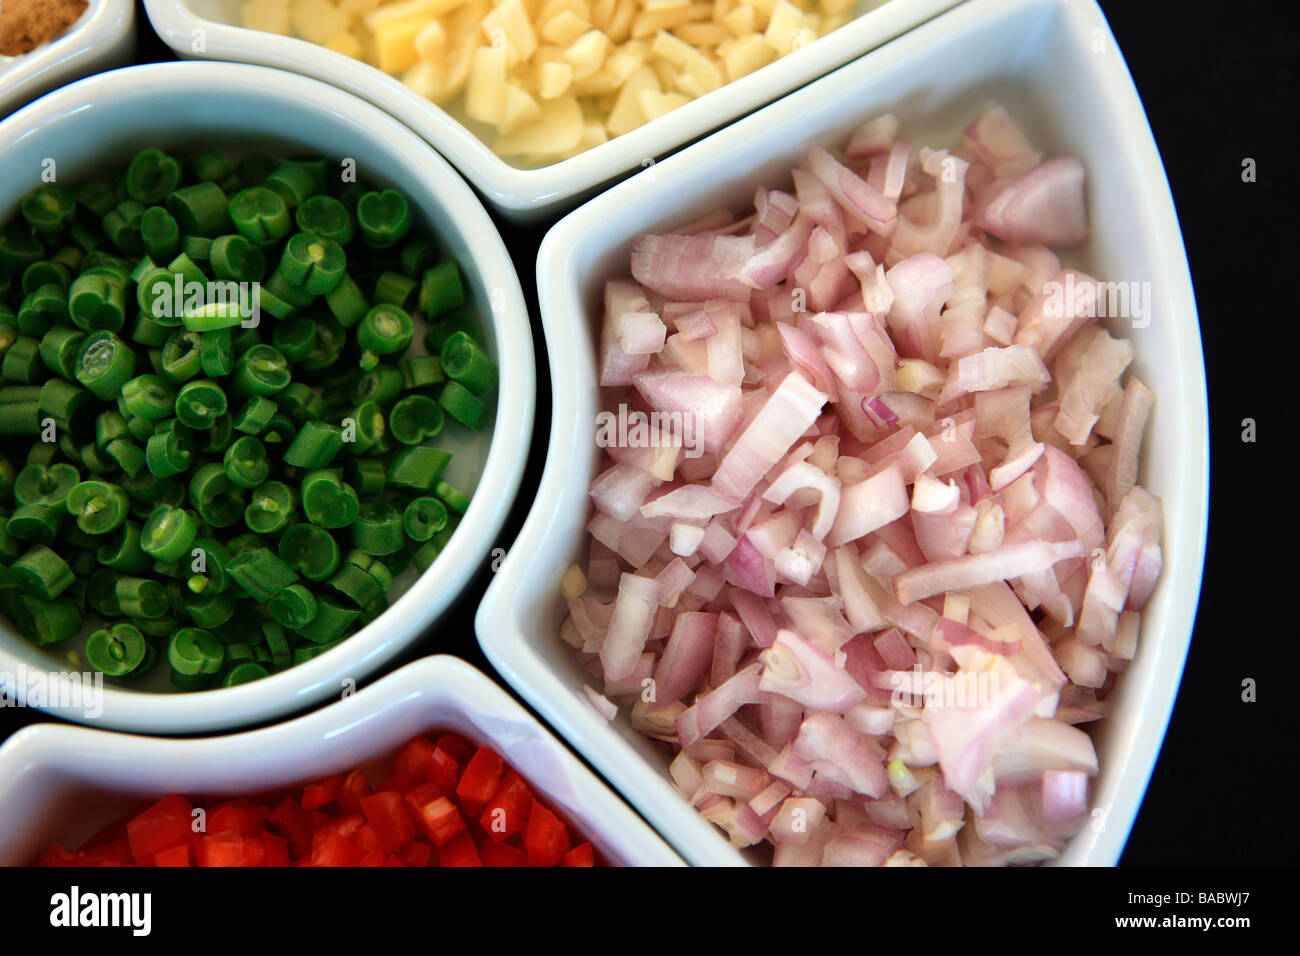 chopped vegetables in a 'lazy Susan' ready to be used in cooking Stock Photo